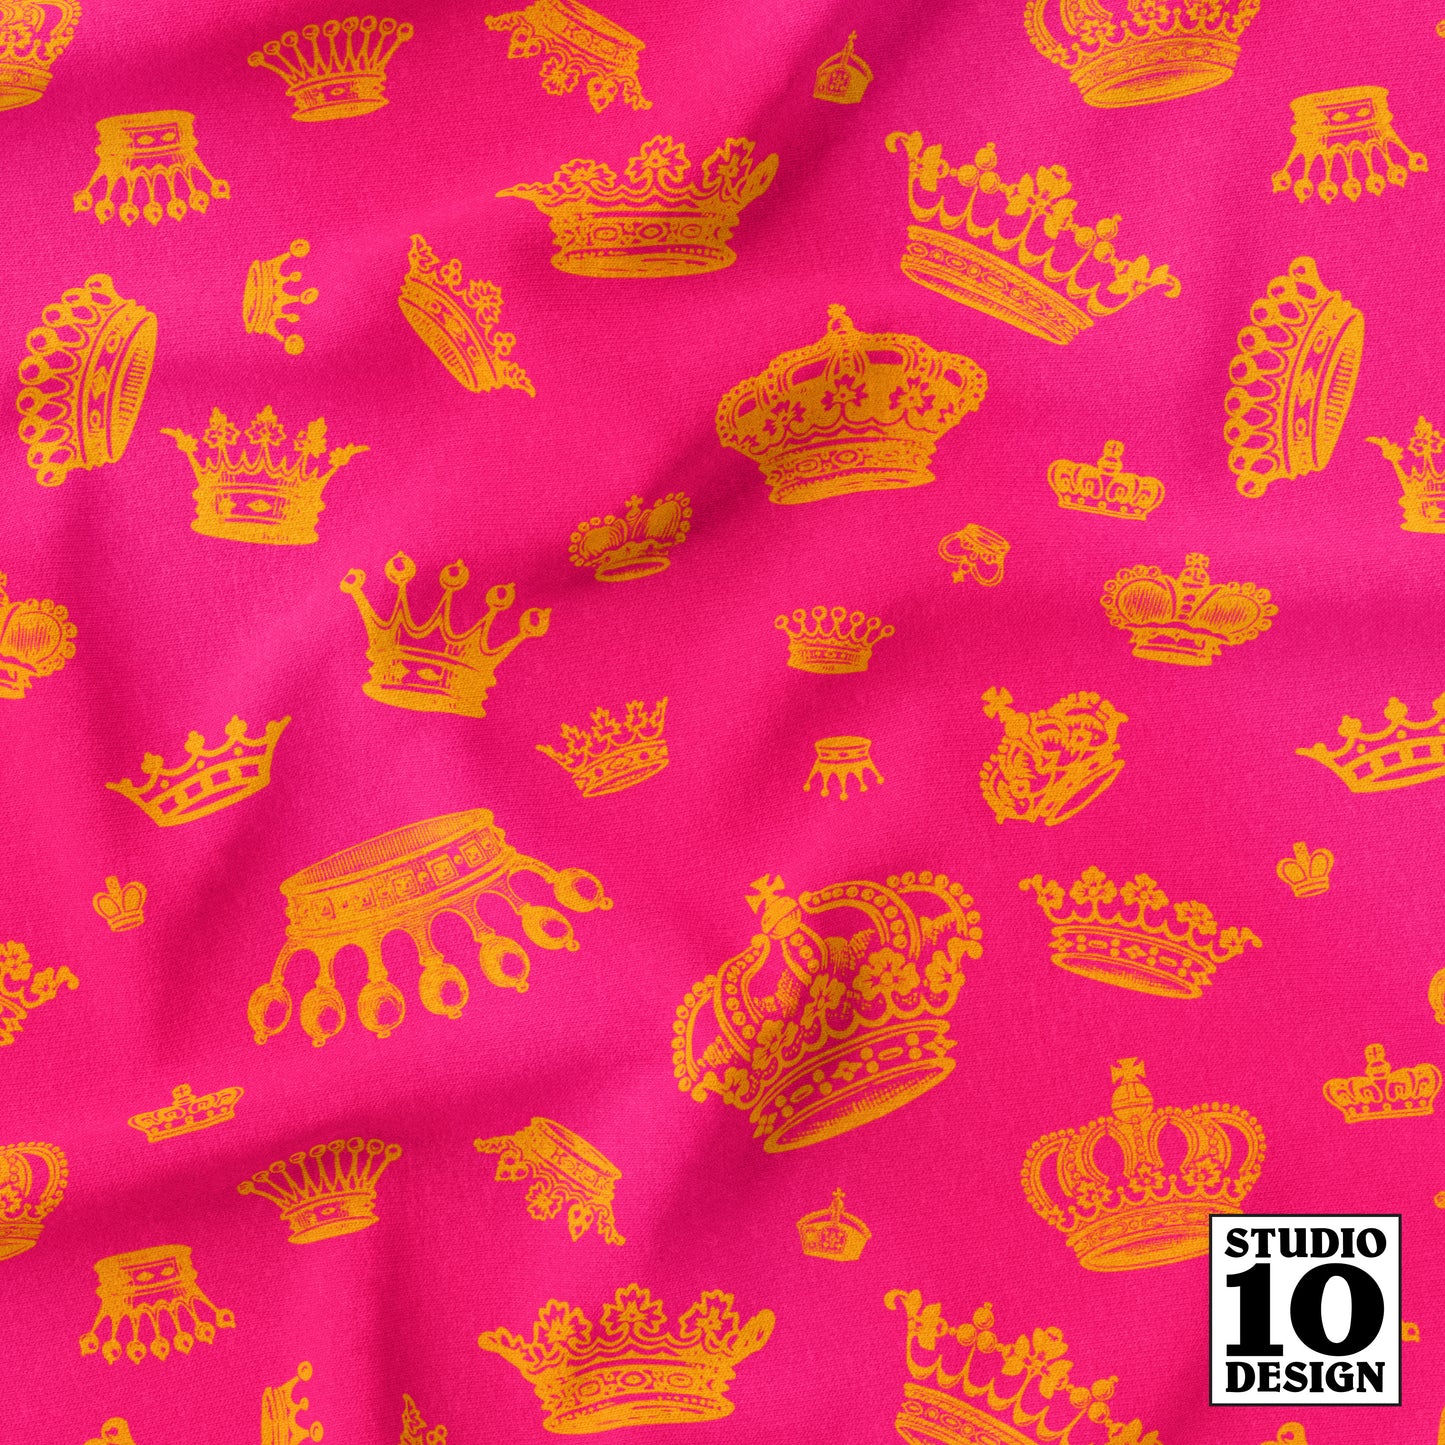 Royal Crowns Golden Yellow+Hot Pink Printed Fabric by Studio Ten Design